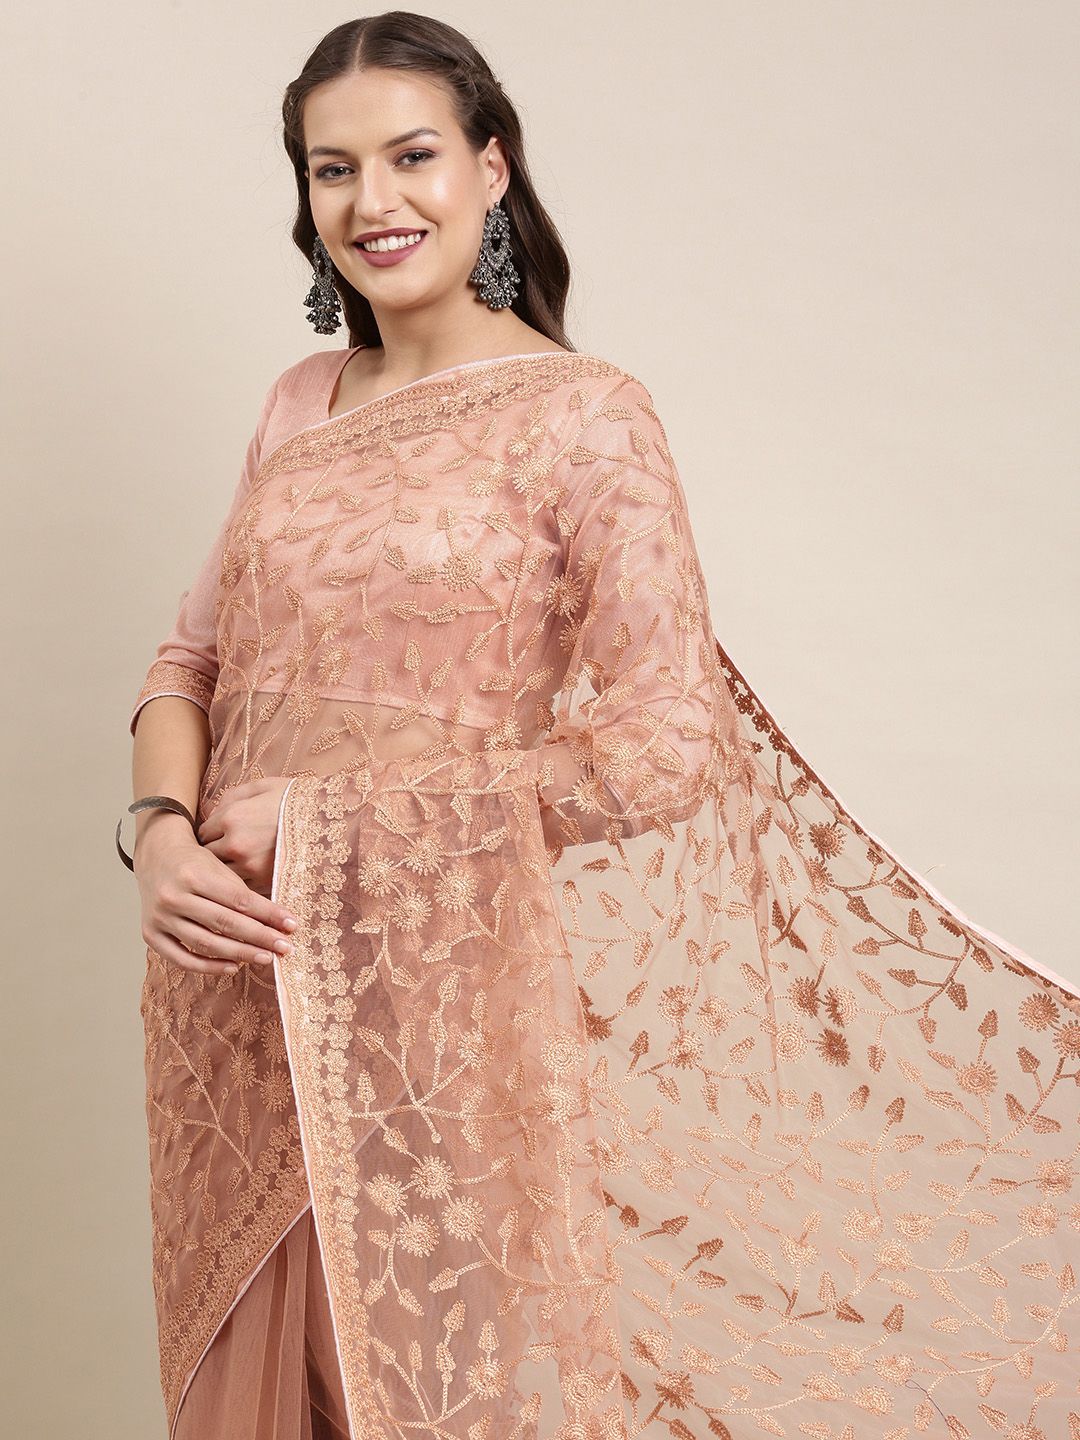 VAIRAGEE Peach-Coloured Ethnic Motifs Embroidered Net Saree Price in India